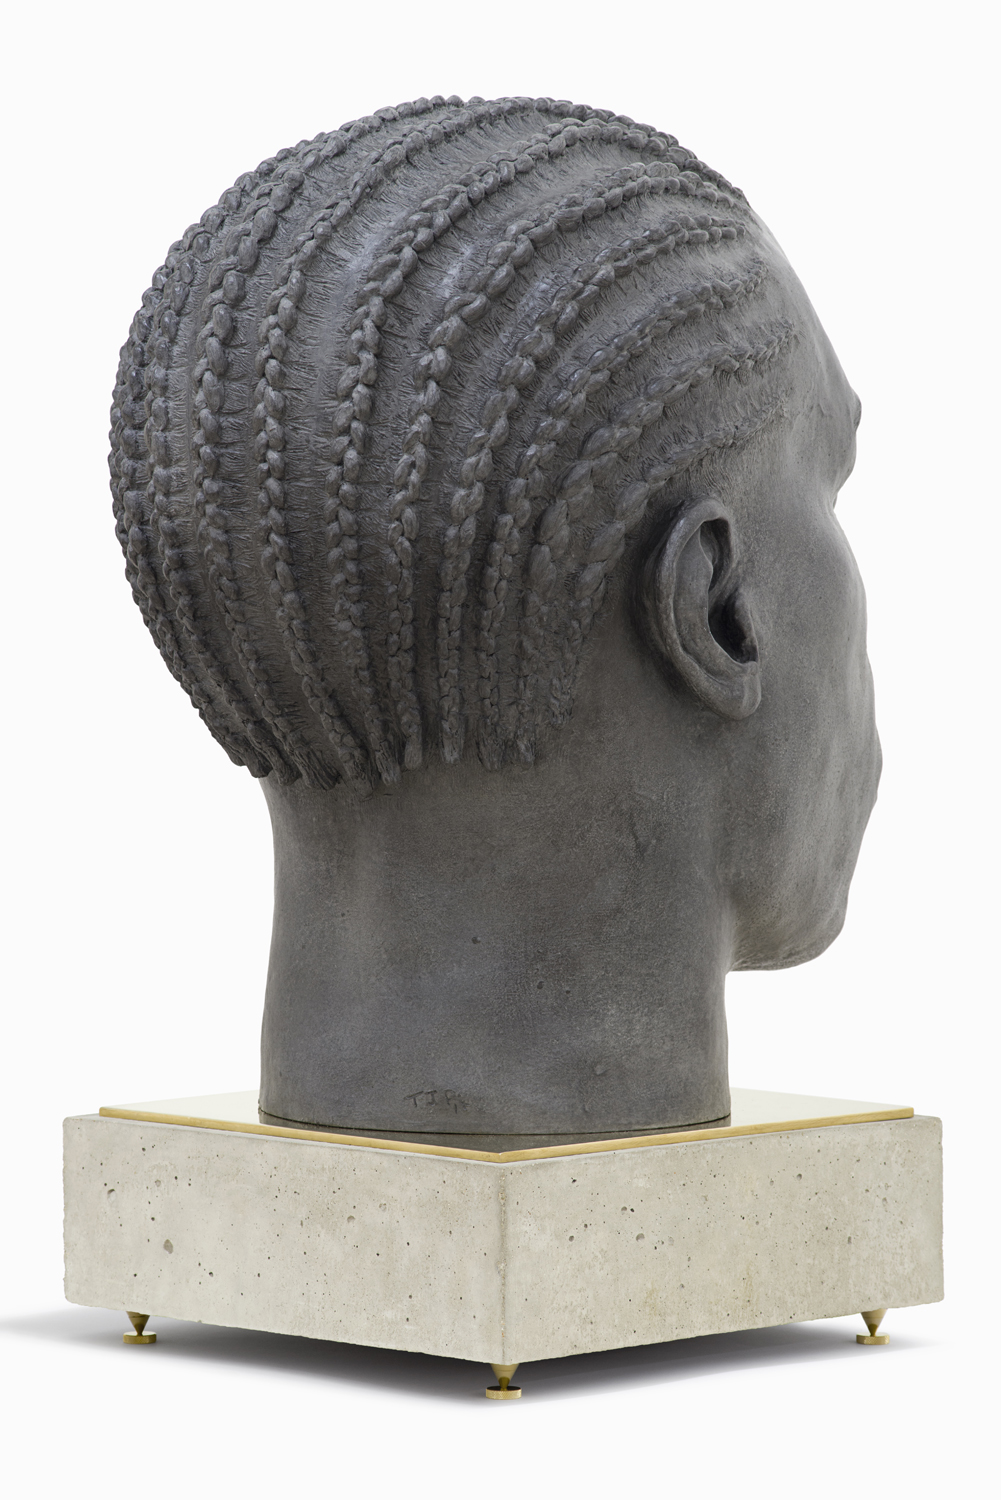 Tom Price, Base - Head (Surface Tension), 2014, bronze, brass and concrete, 77 x 45 x 60 cm [65 x 45 x 60 cm head, 12 x 40 x 40 cm base] [225].jpg